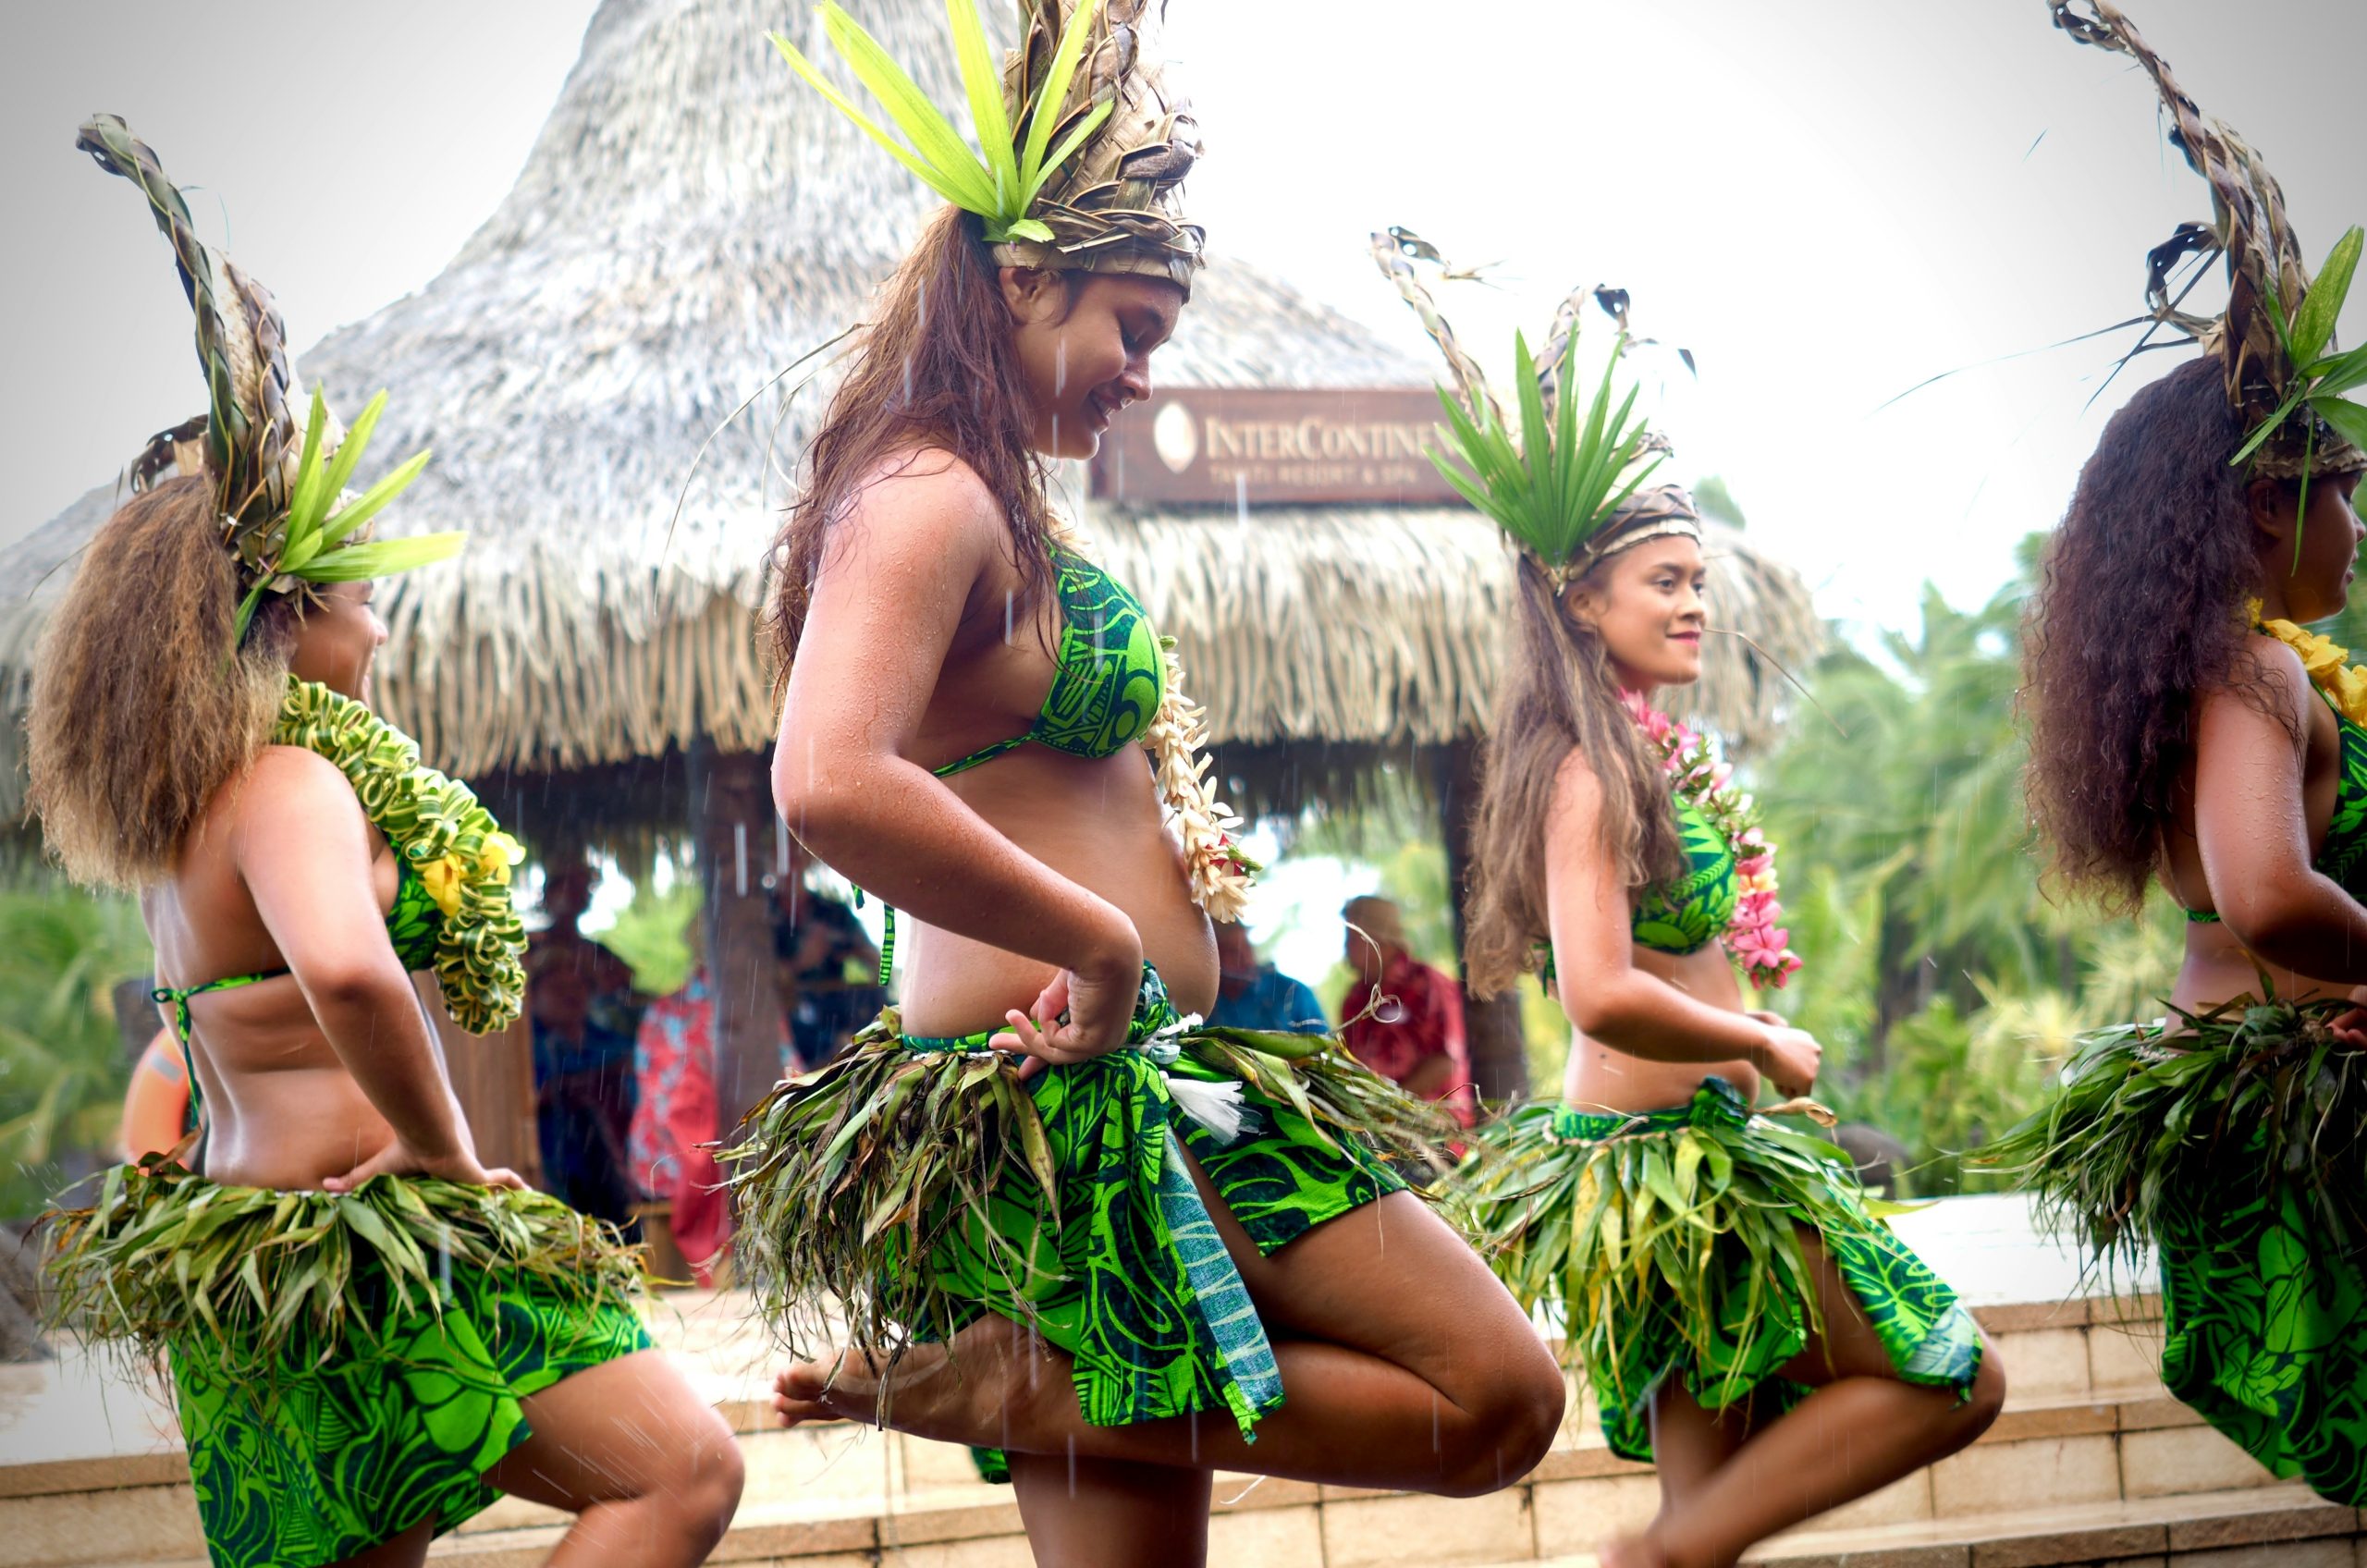 discover the beauty of tahiti with our tourism guide. plan your dream vacation in tahiti with information on attractions, accommodations, and activities.